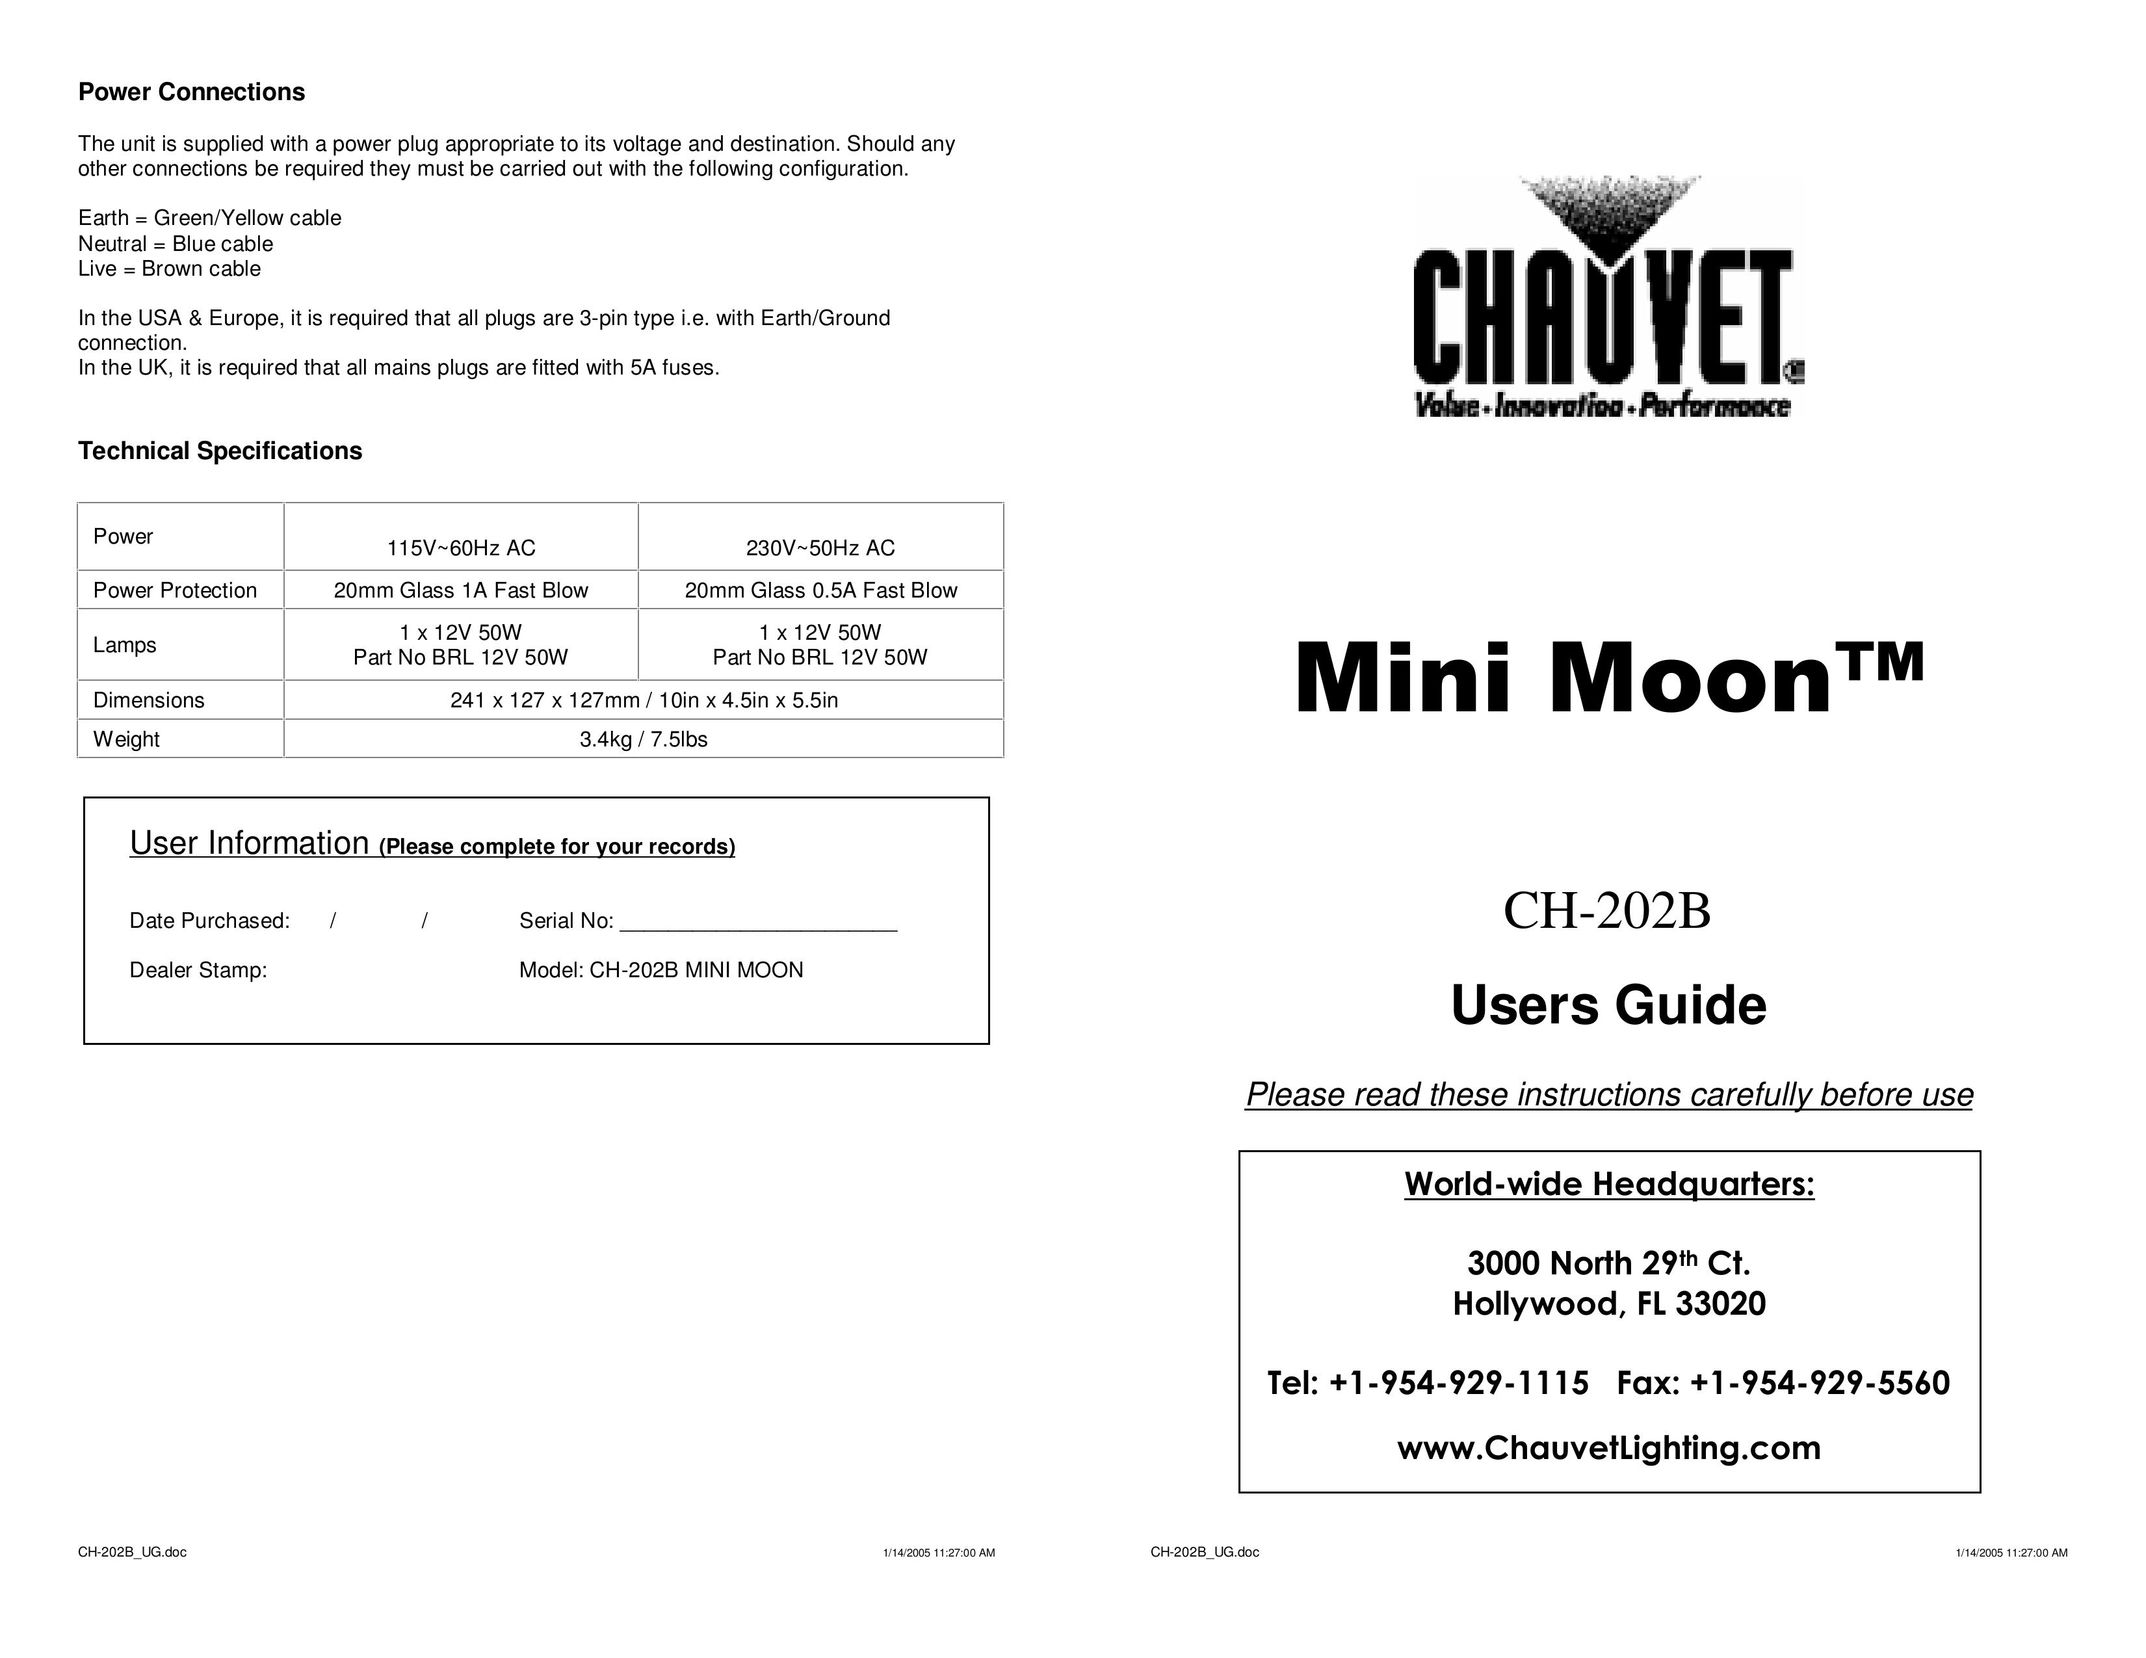 Chauvet CH-202B Power Supply User Manual (Page 1)